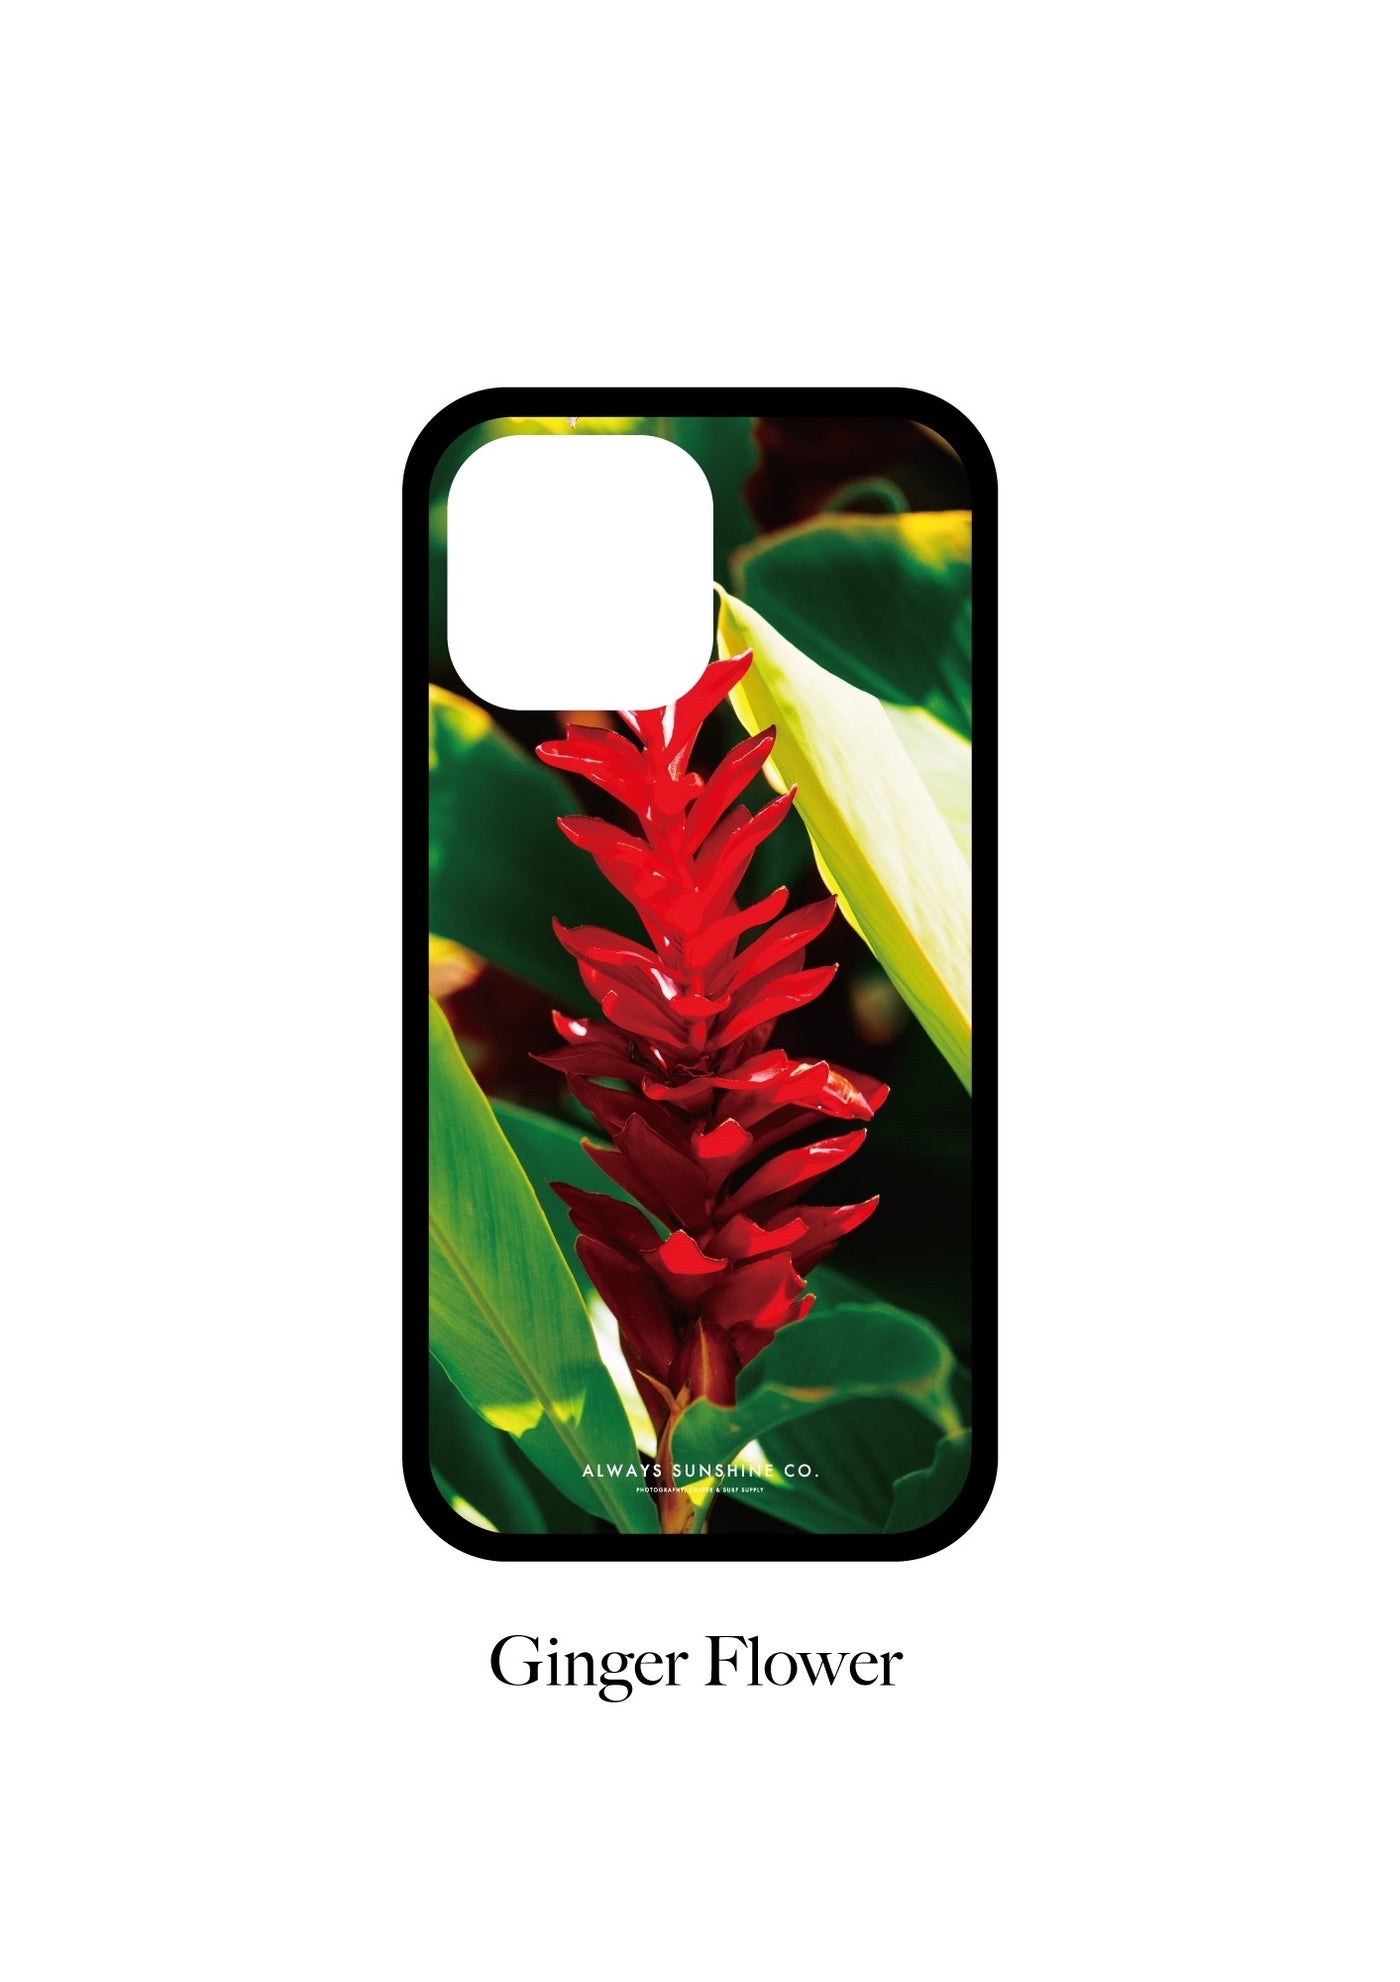 【PAGE 1】完全受注オーダー New Glass Photo iPhone Cover <HAWAII COLLECTION>